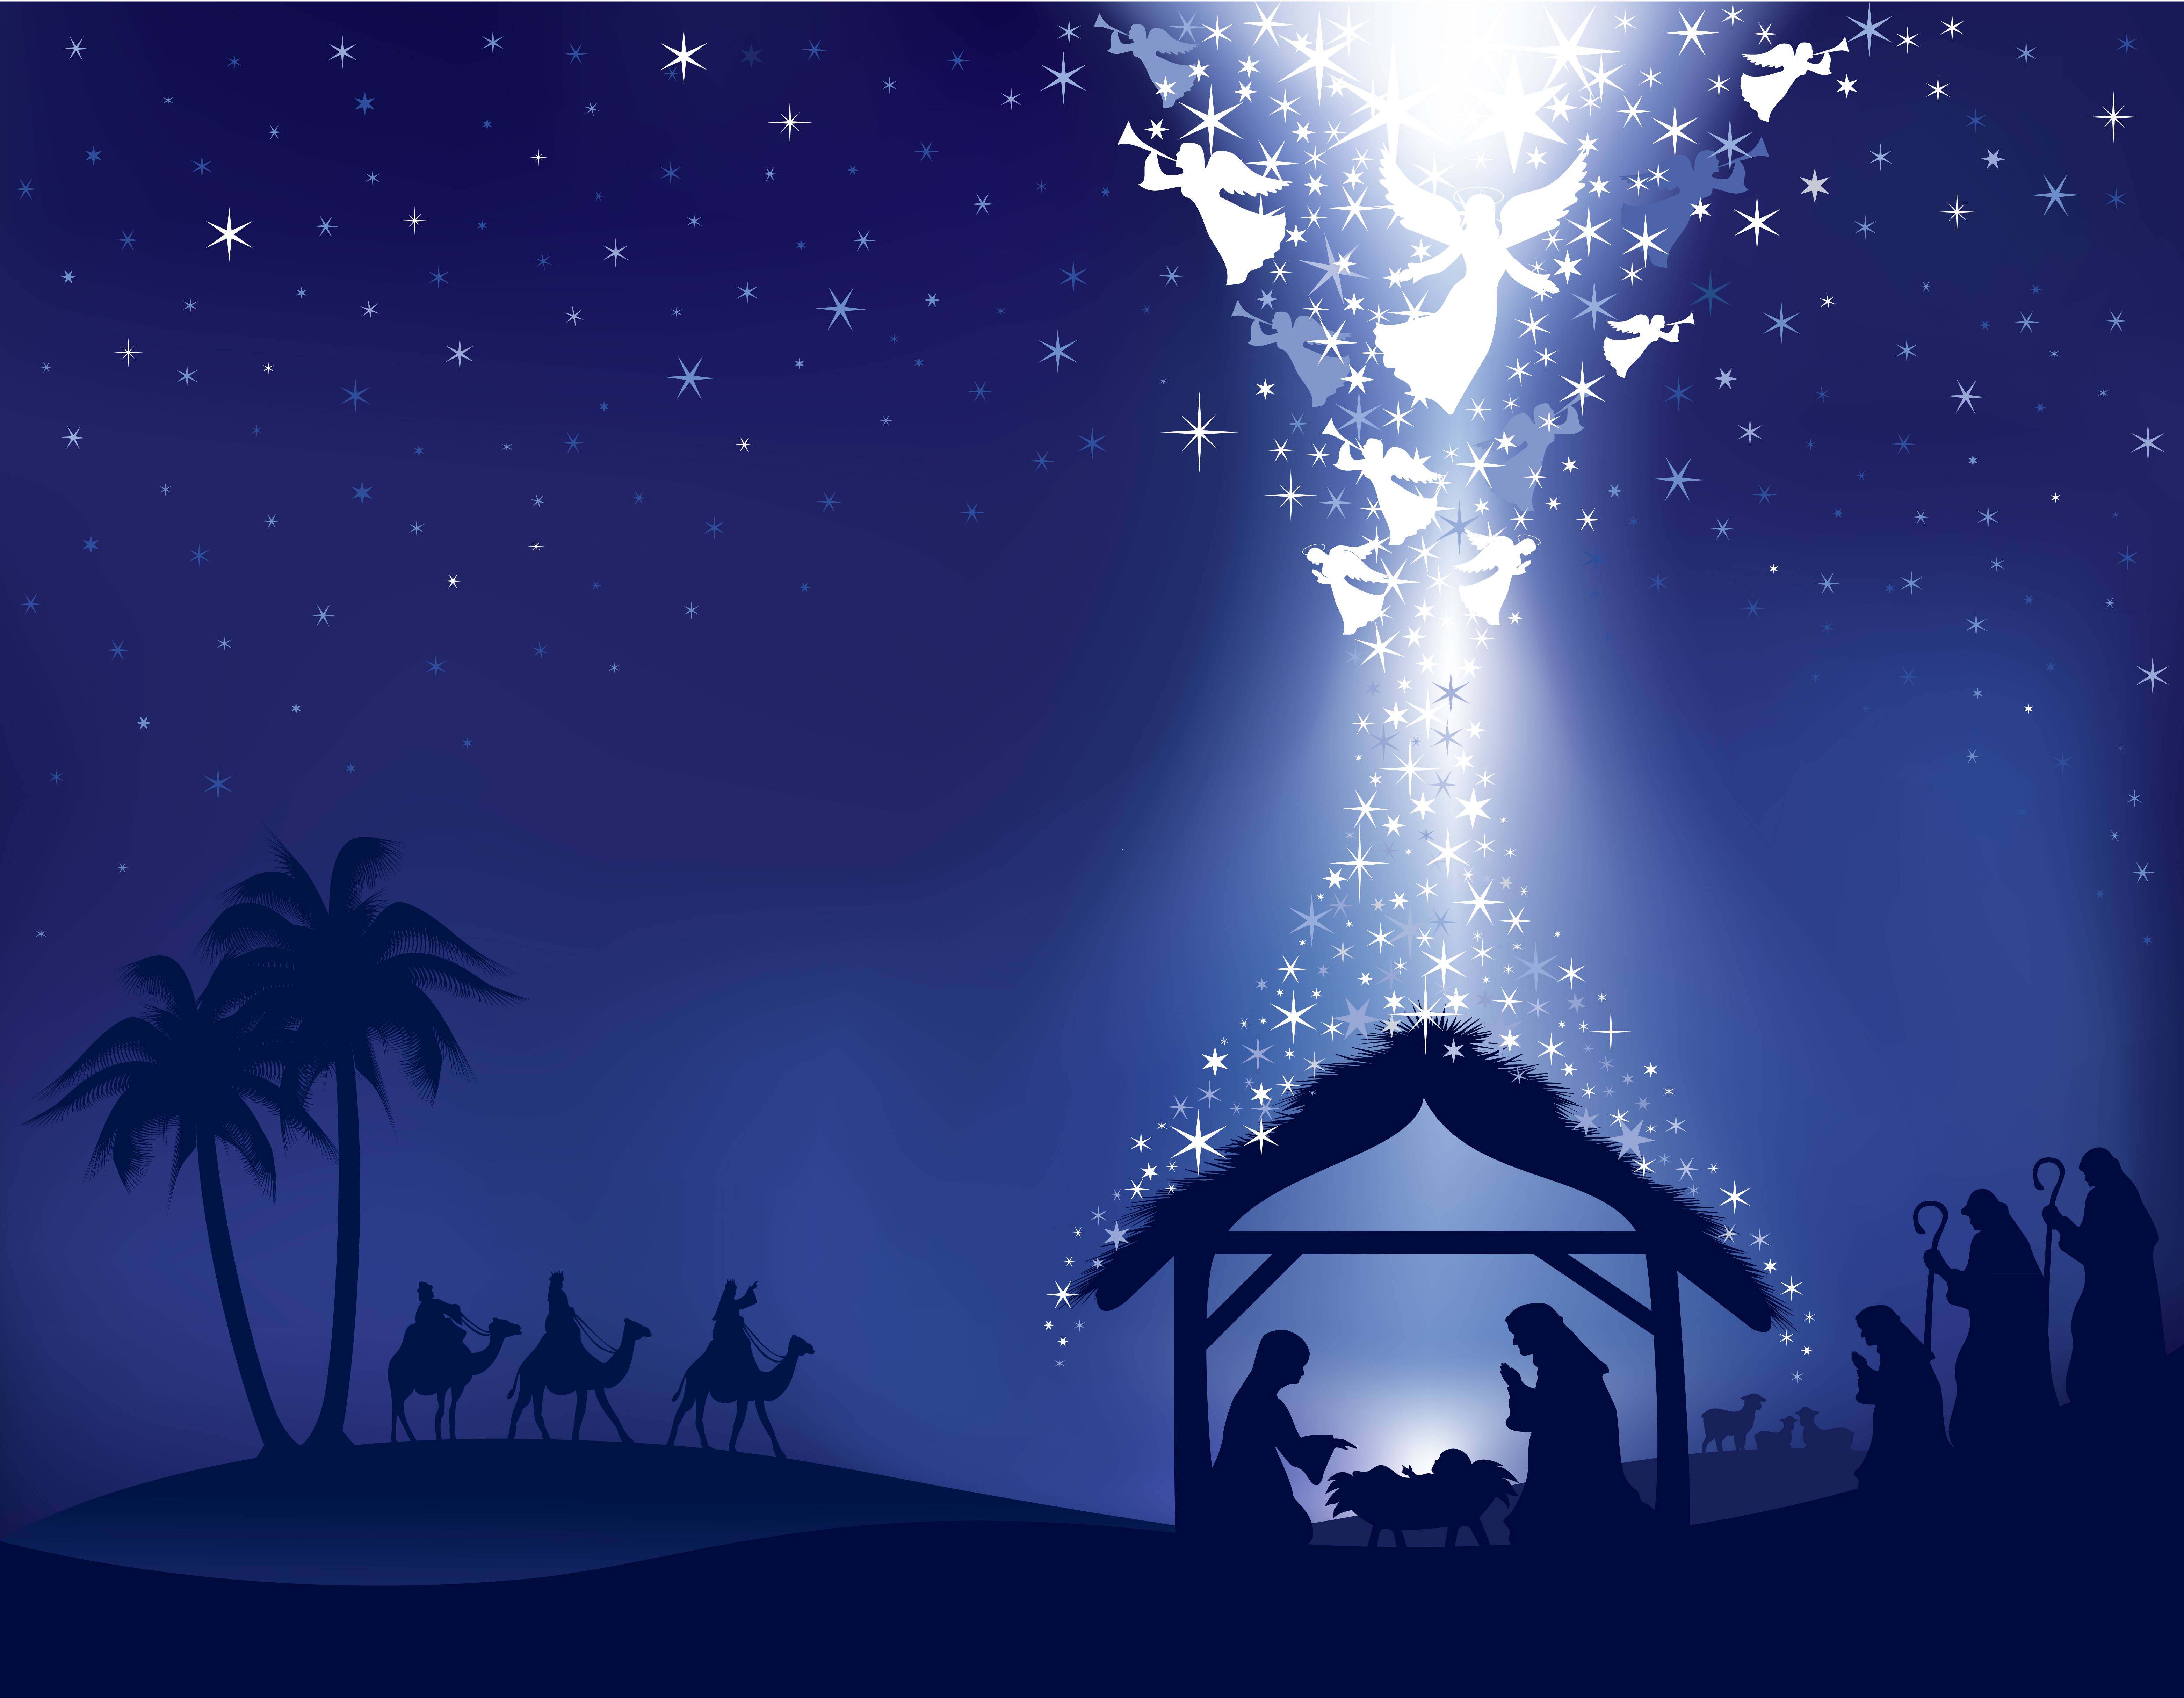 Christmas Is An Annual Festival Commemorating The Birth Of Jesus Christ. #2  Mobile-Wallpaper Wallpaper